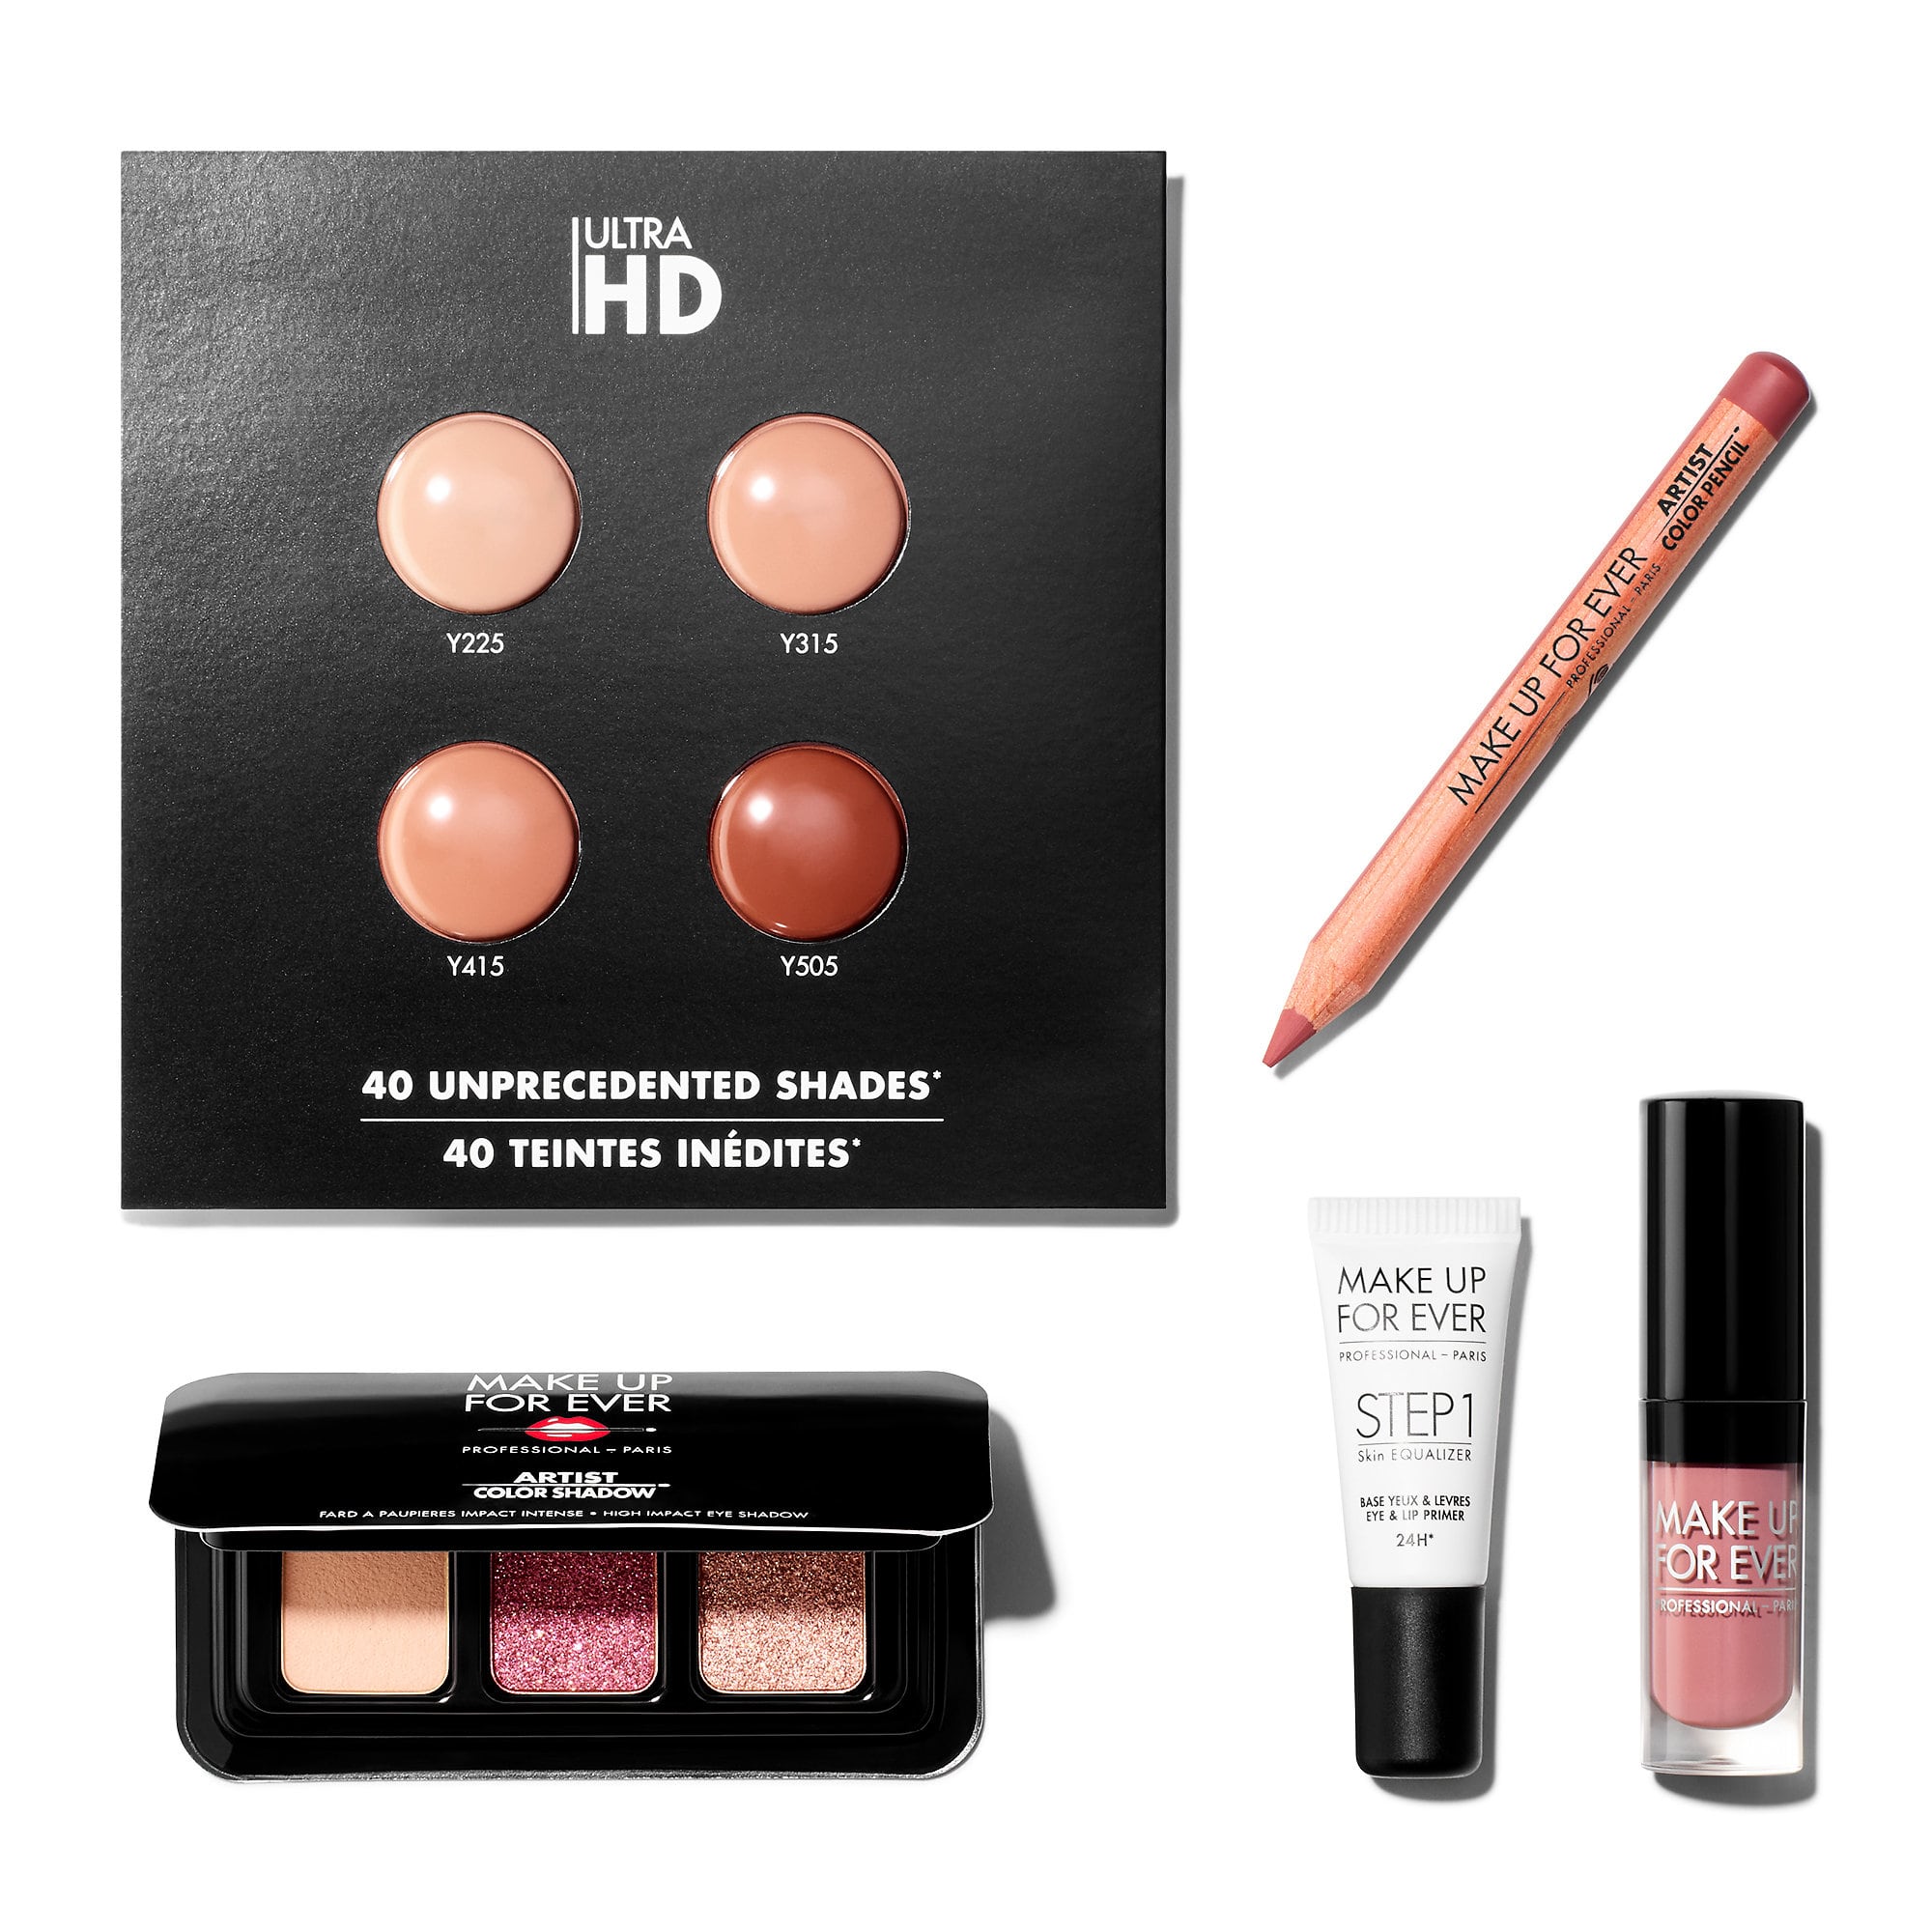 Sephora Beauty Insider Sale Fall 2018 -- Sephora Beauty Insider Sale September 2018 blogger picks! Blogger COVET by tricia shows what to buy and what to skip from the Fall 2018 Sephora Sale. The Sephora Beauty Insider Event is one of the best beauty sales of the year, so don't miss this chance to stock up on essentials! Here are the top picks from the Fall 2018 Sephora Beauty Insider Sale! #LTKBeauty #Beauty #Makeup #MakeupLover #Sephora